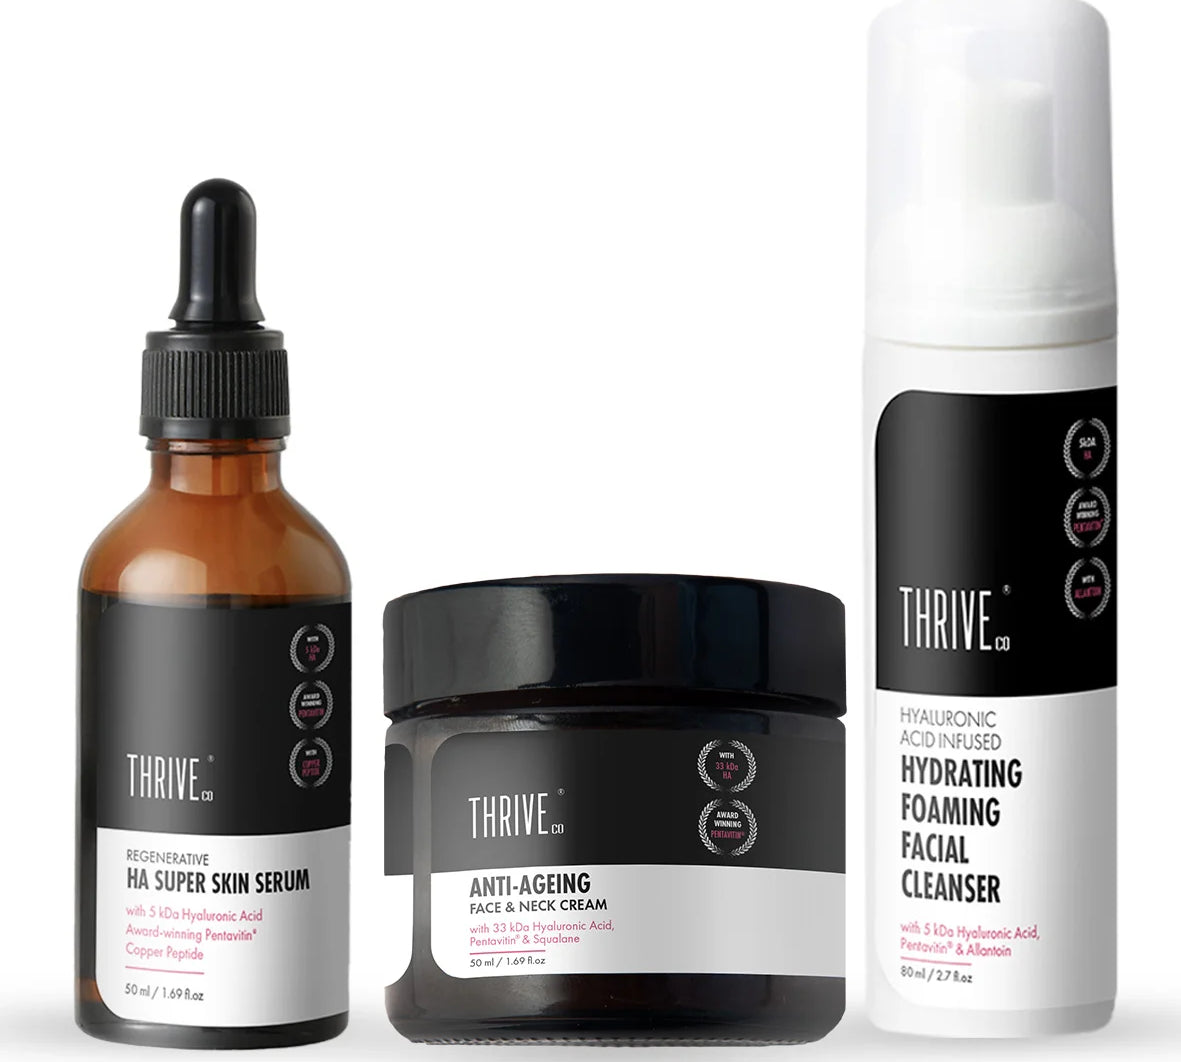 ThriveCo Youthful Hydrating Skin Care Kit Hydrating Foaming Facial Cleanser Anti Ageing Face and Neck Cream Hyaluronic Acid Super Skin Serum